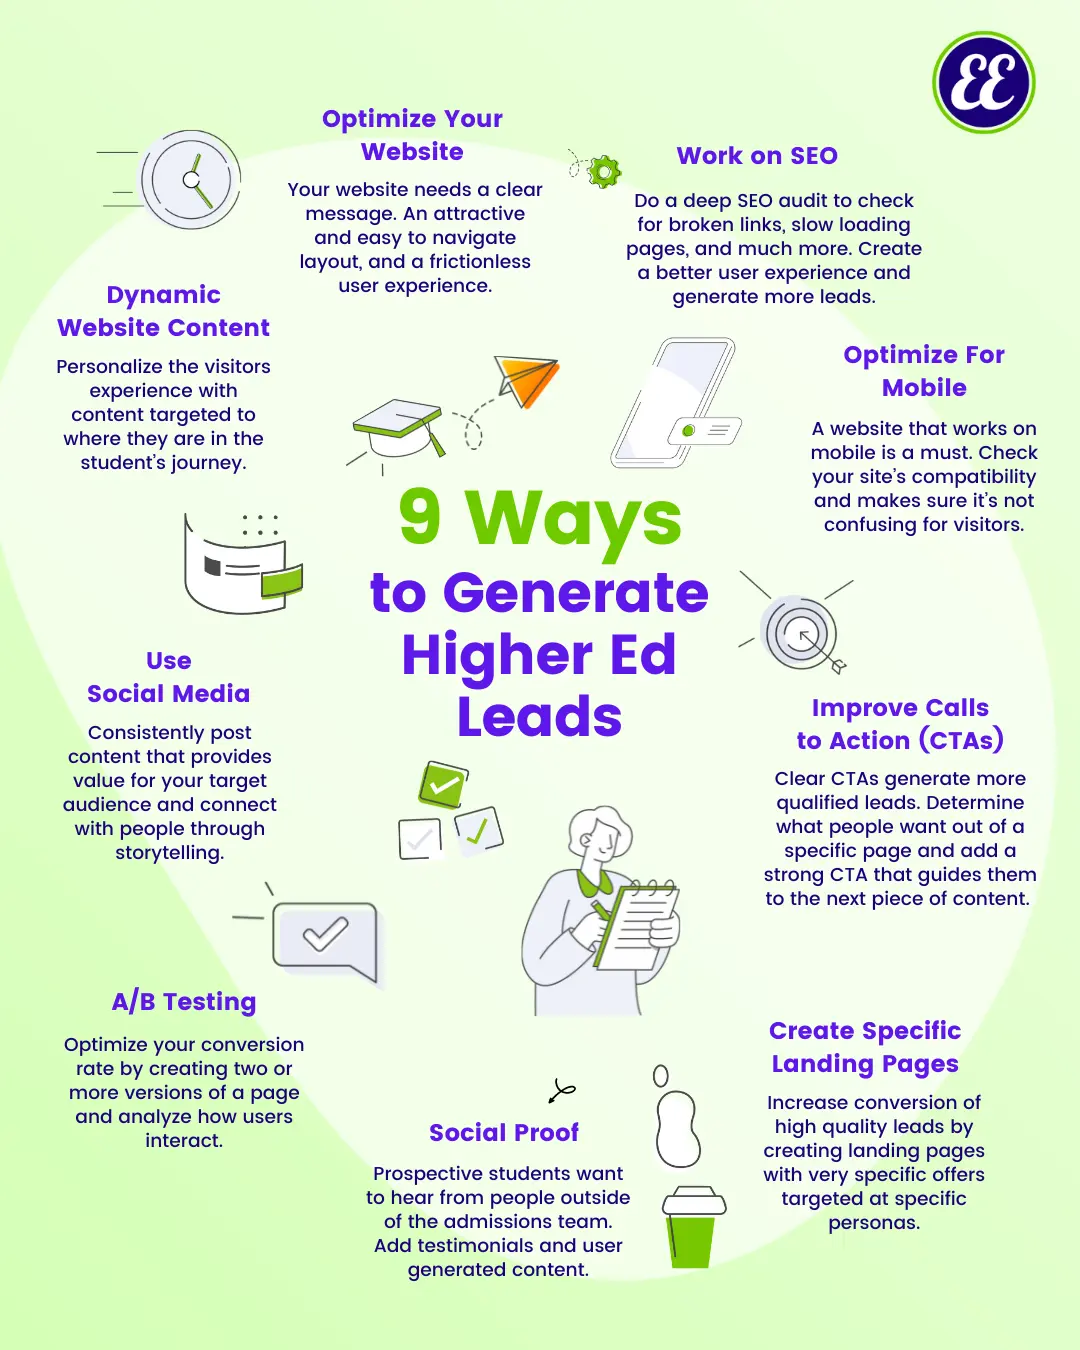 9 ways to generate higher ed leads